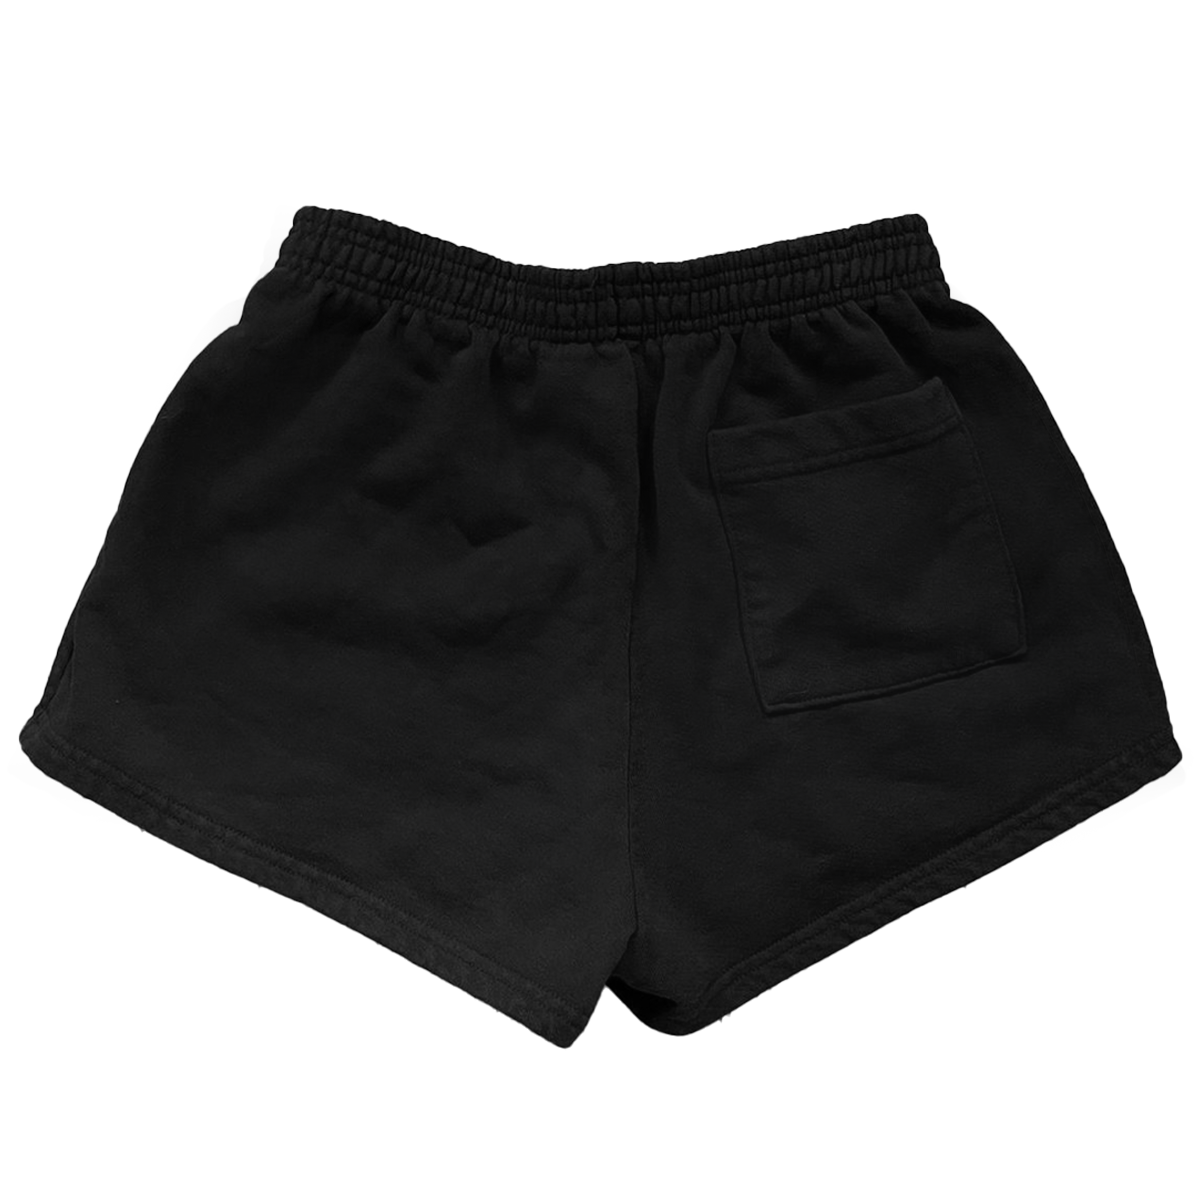 Delicate and Violent Women's Heavyweight Shorts